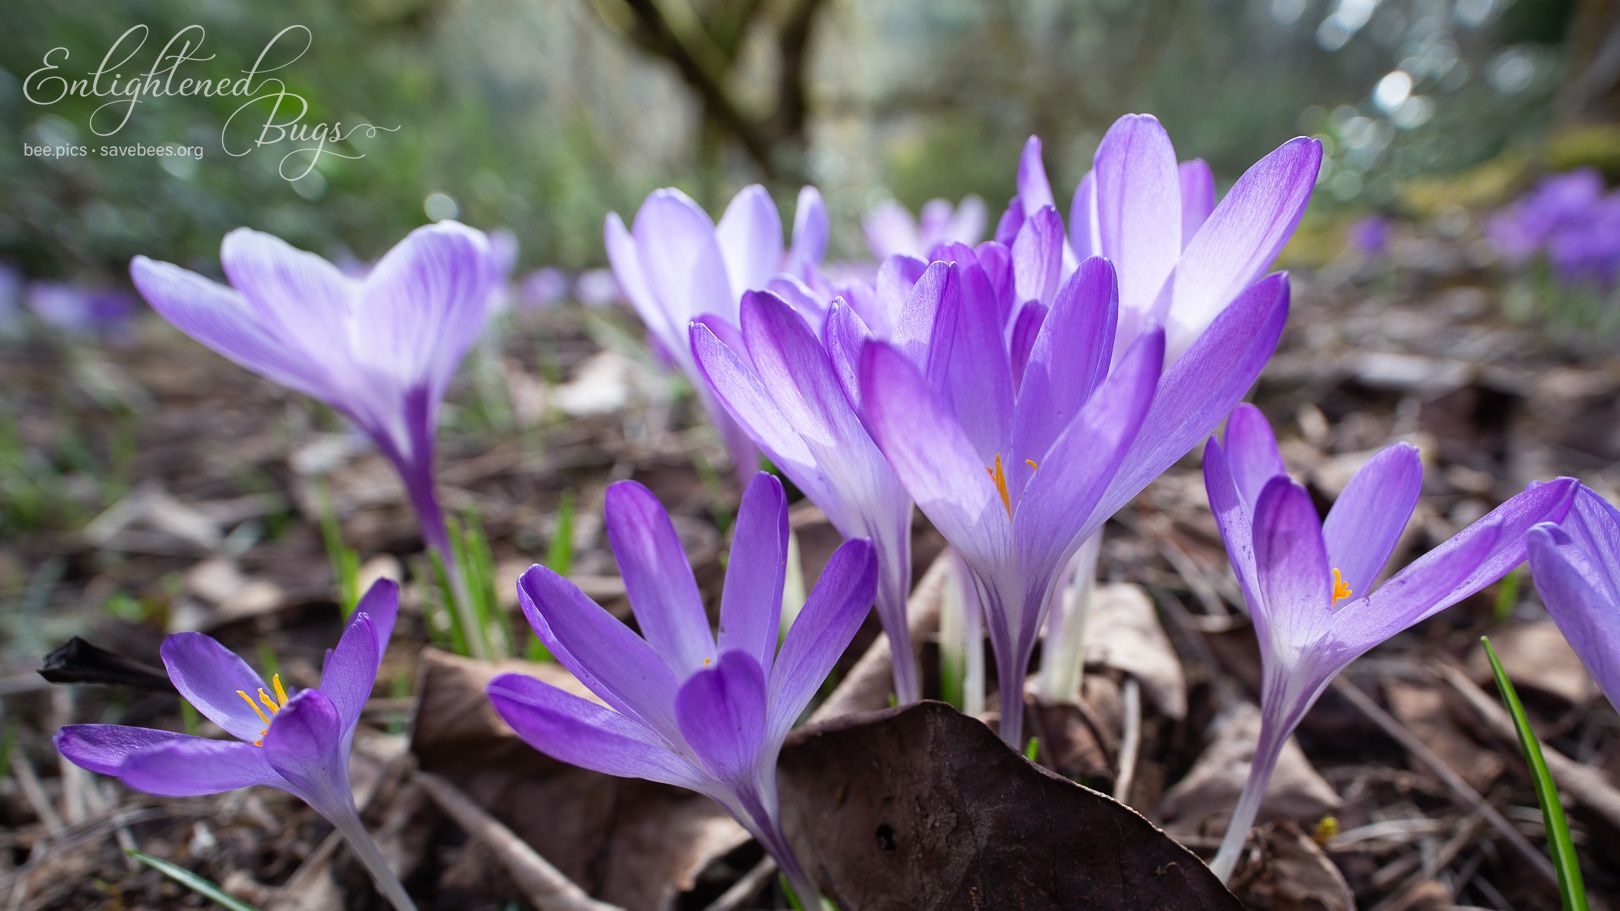 Crocus flowers bursting from the leaf litter, illuminated by early spring sunlight, almost glowing purple, awaiting the bees